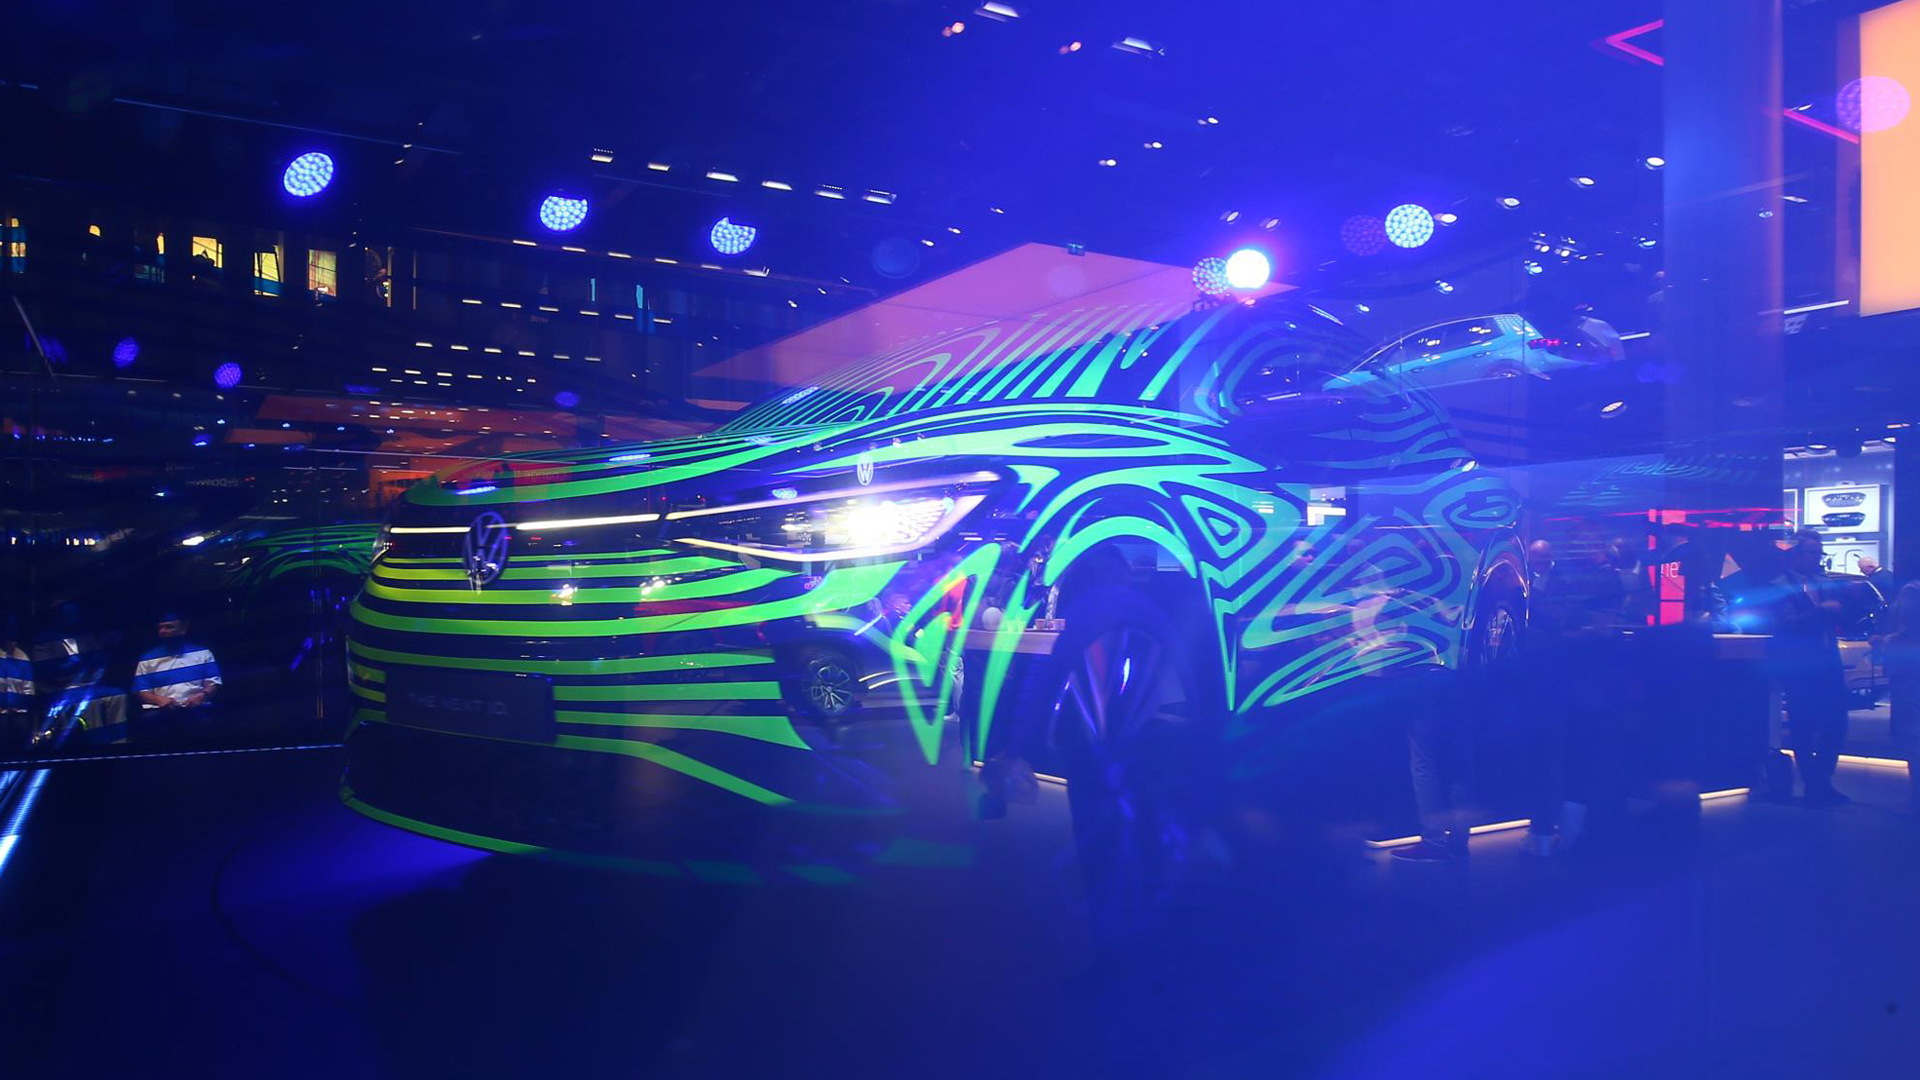 Volkswagen confirms the production Crozz electric crossover as the ID.4